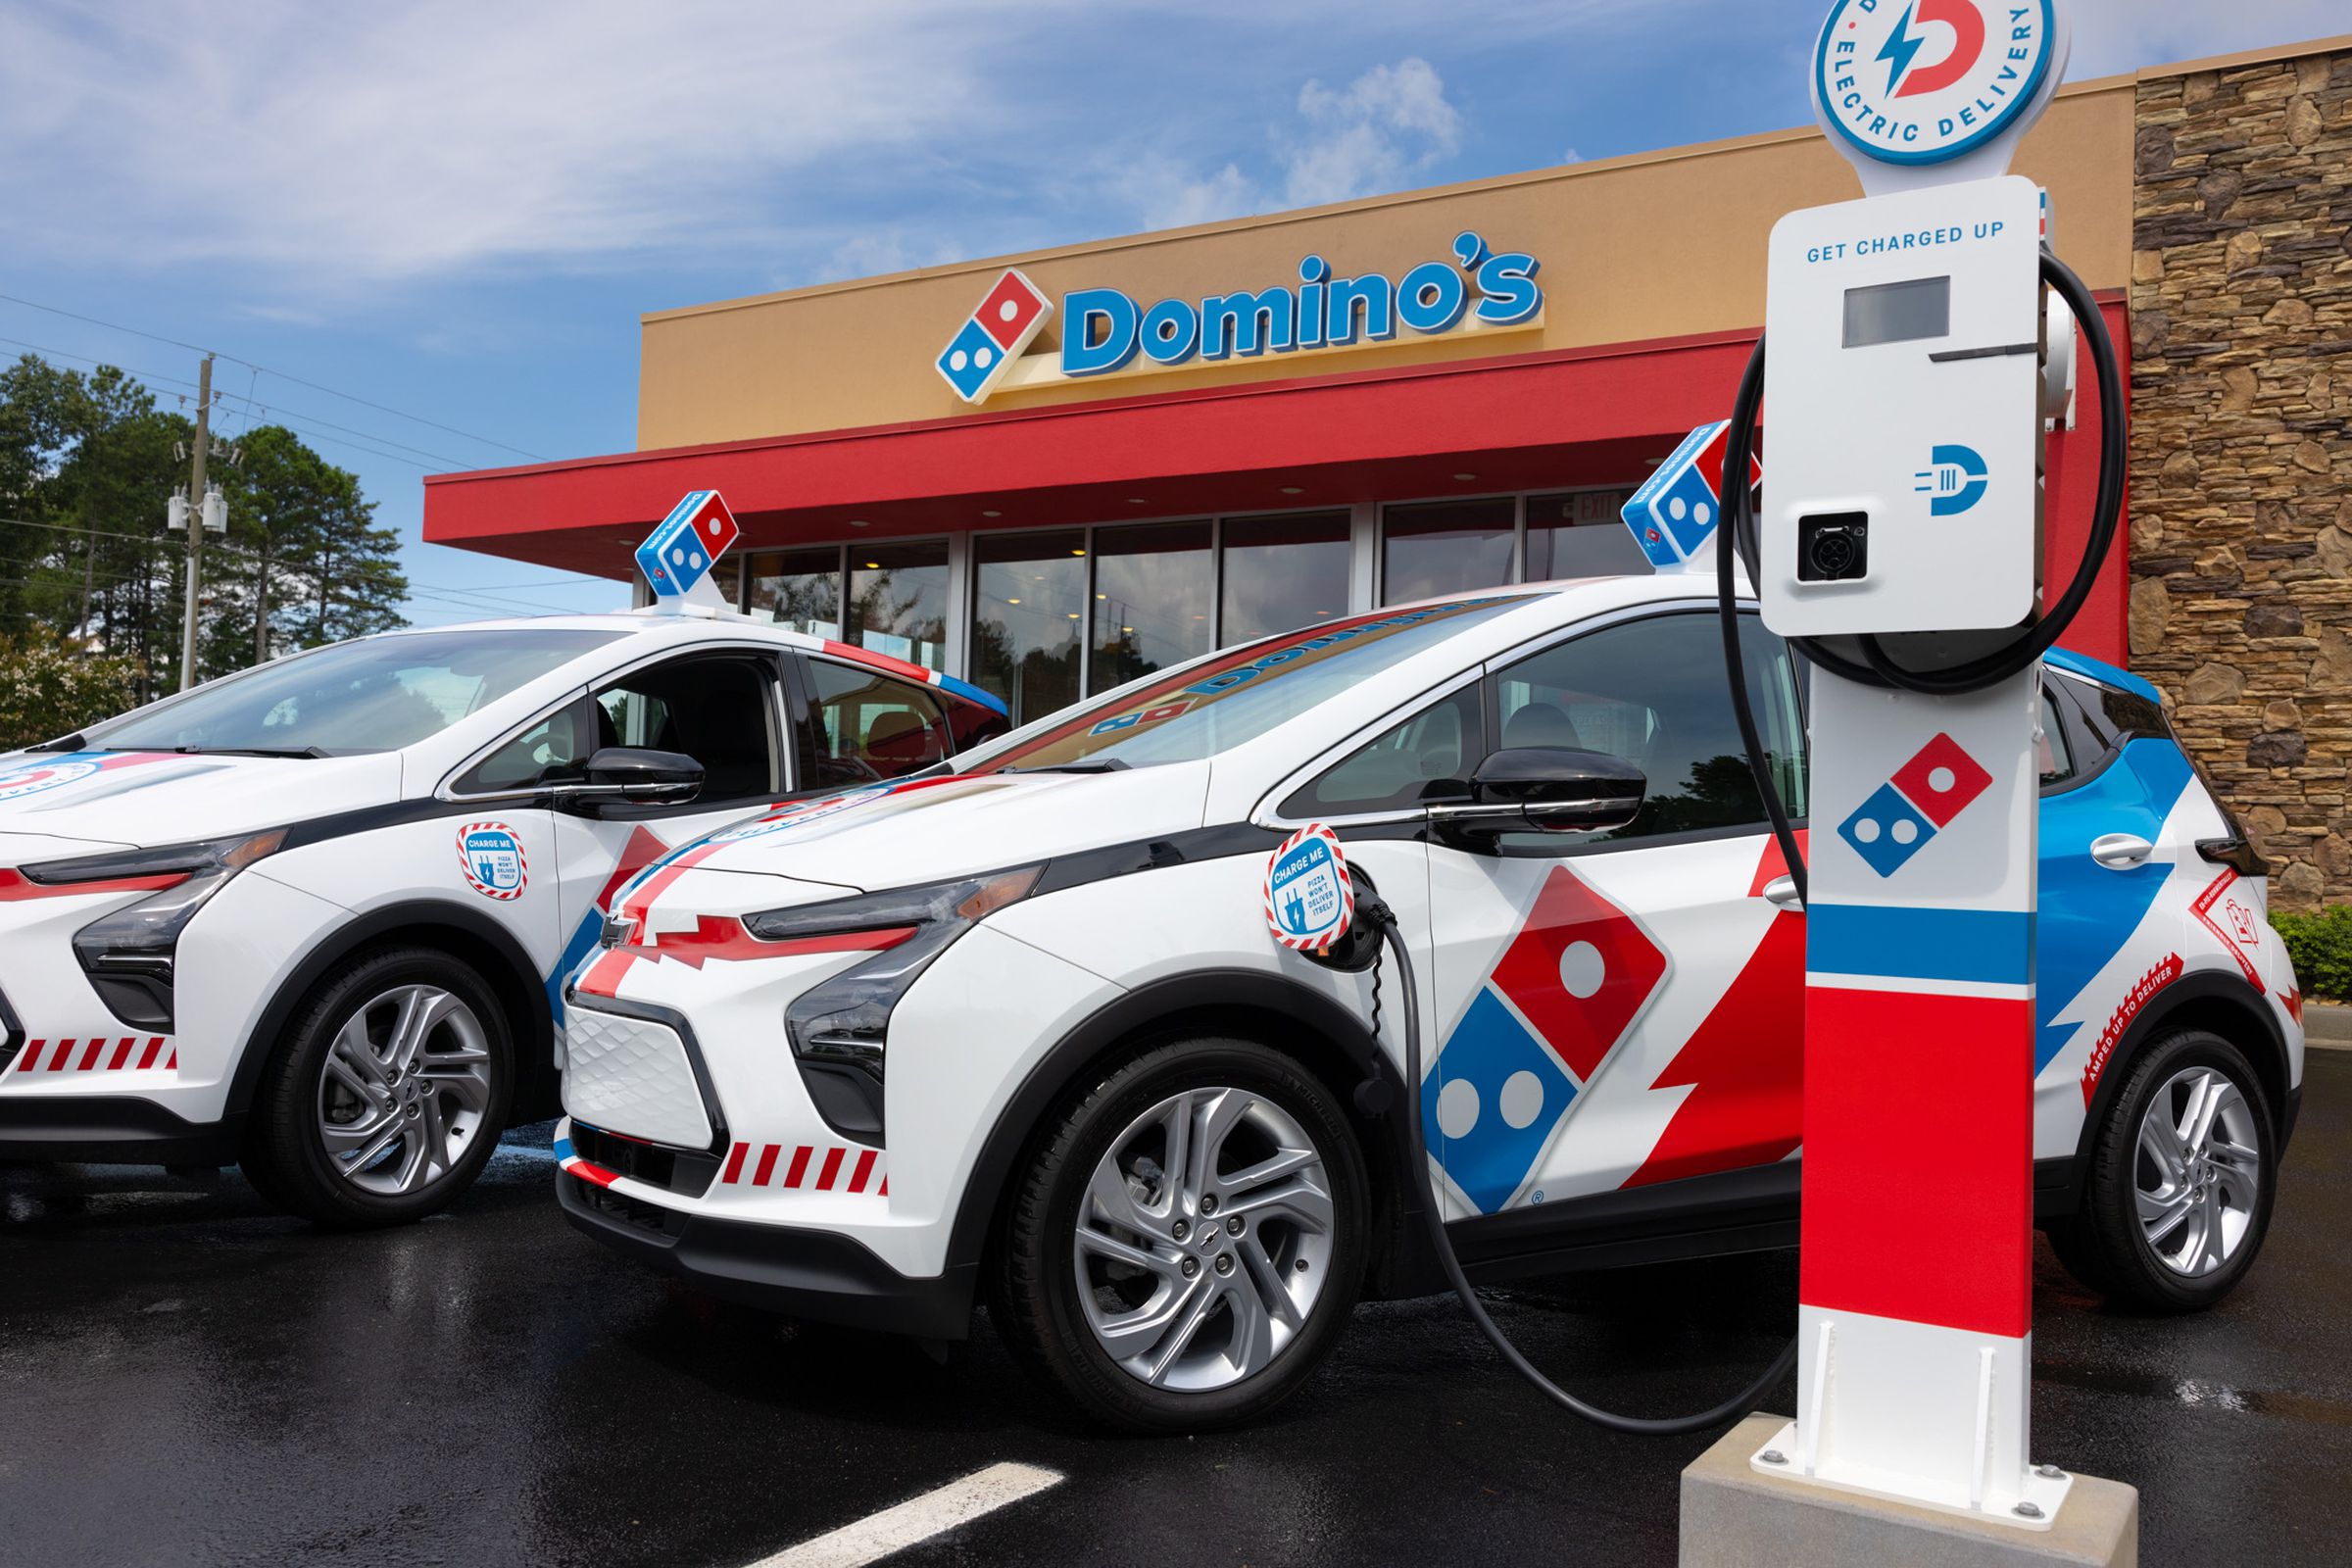 Two chevy bolt ev cars, wrapped in domino’s artwork are parked in front of a domino’s pizza store with one of the cars hooked up to a charger.